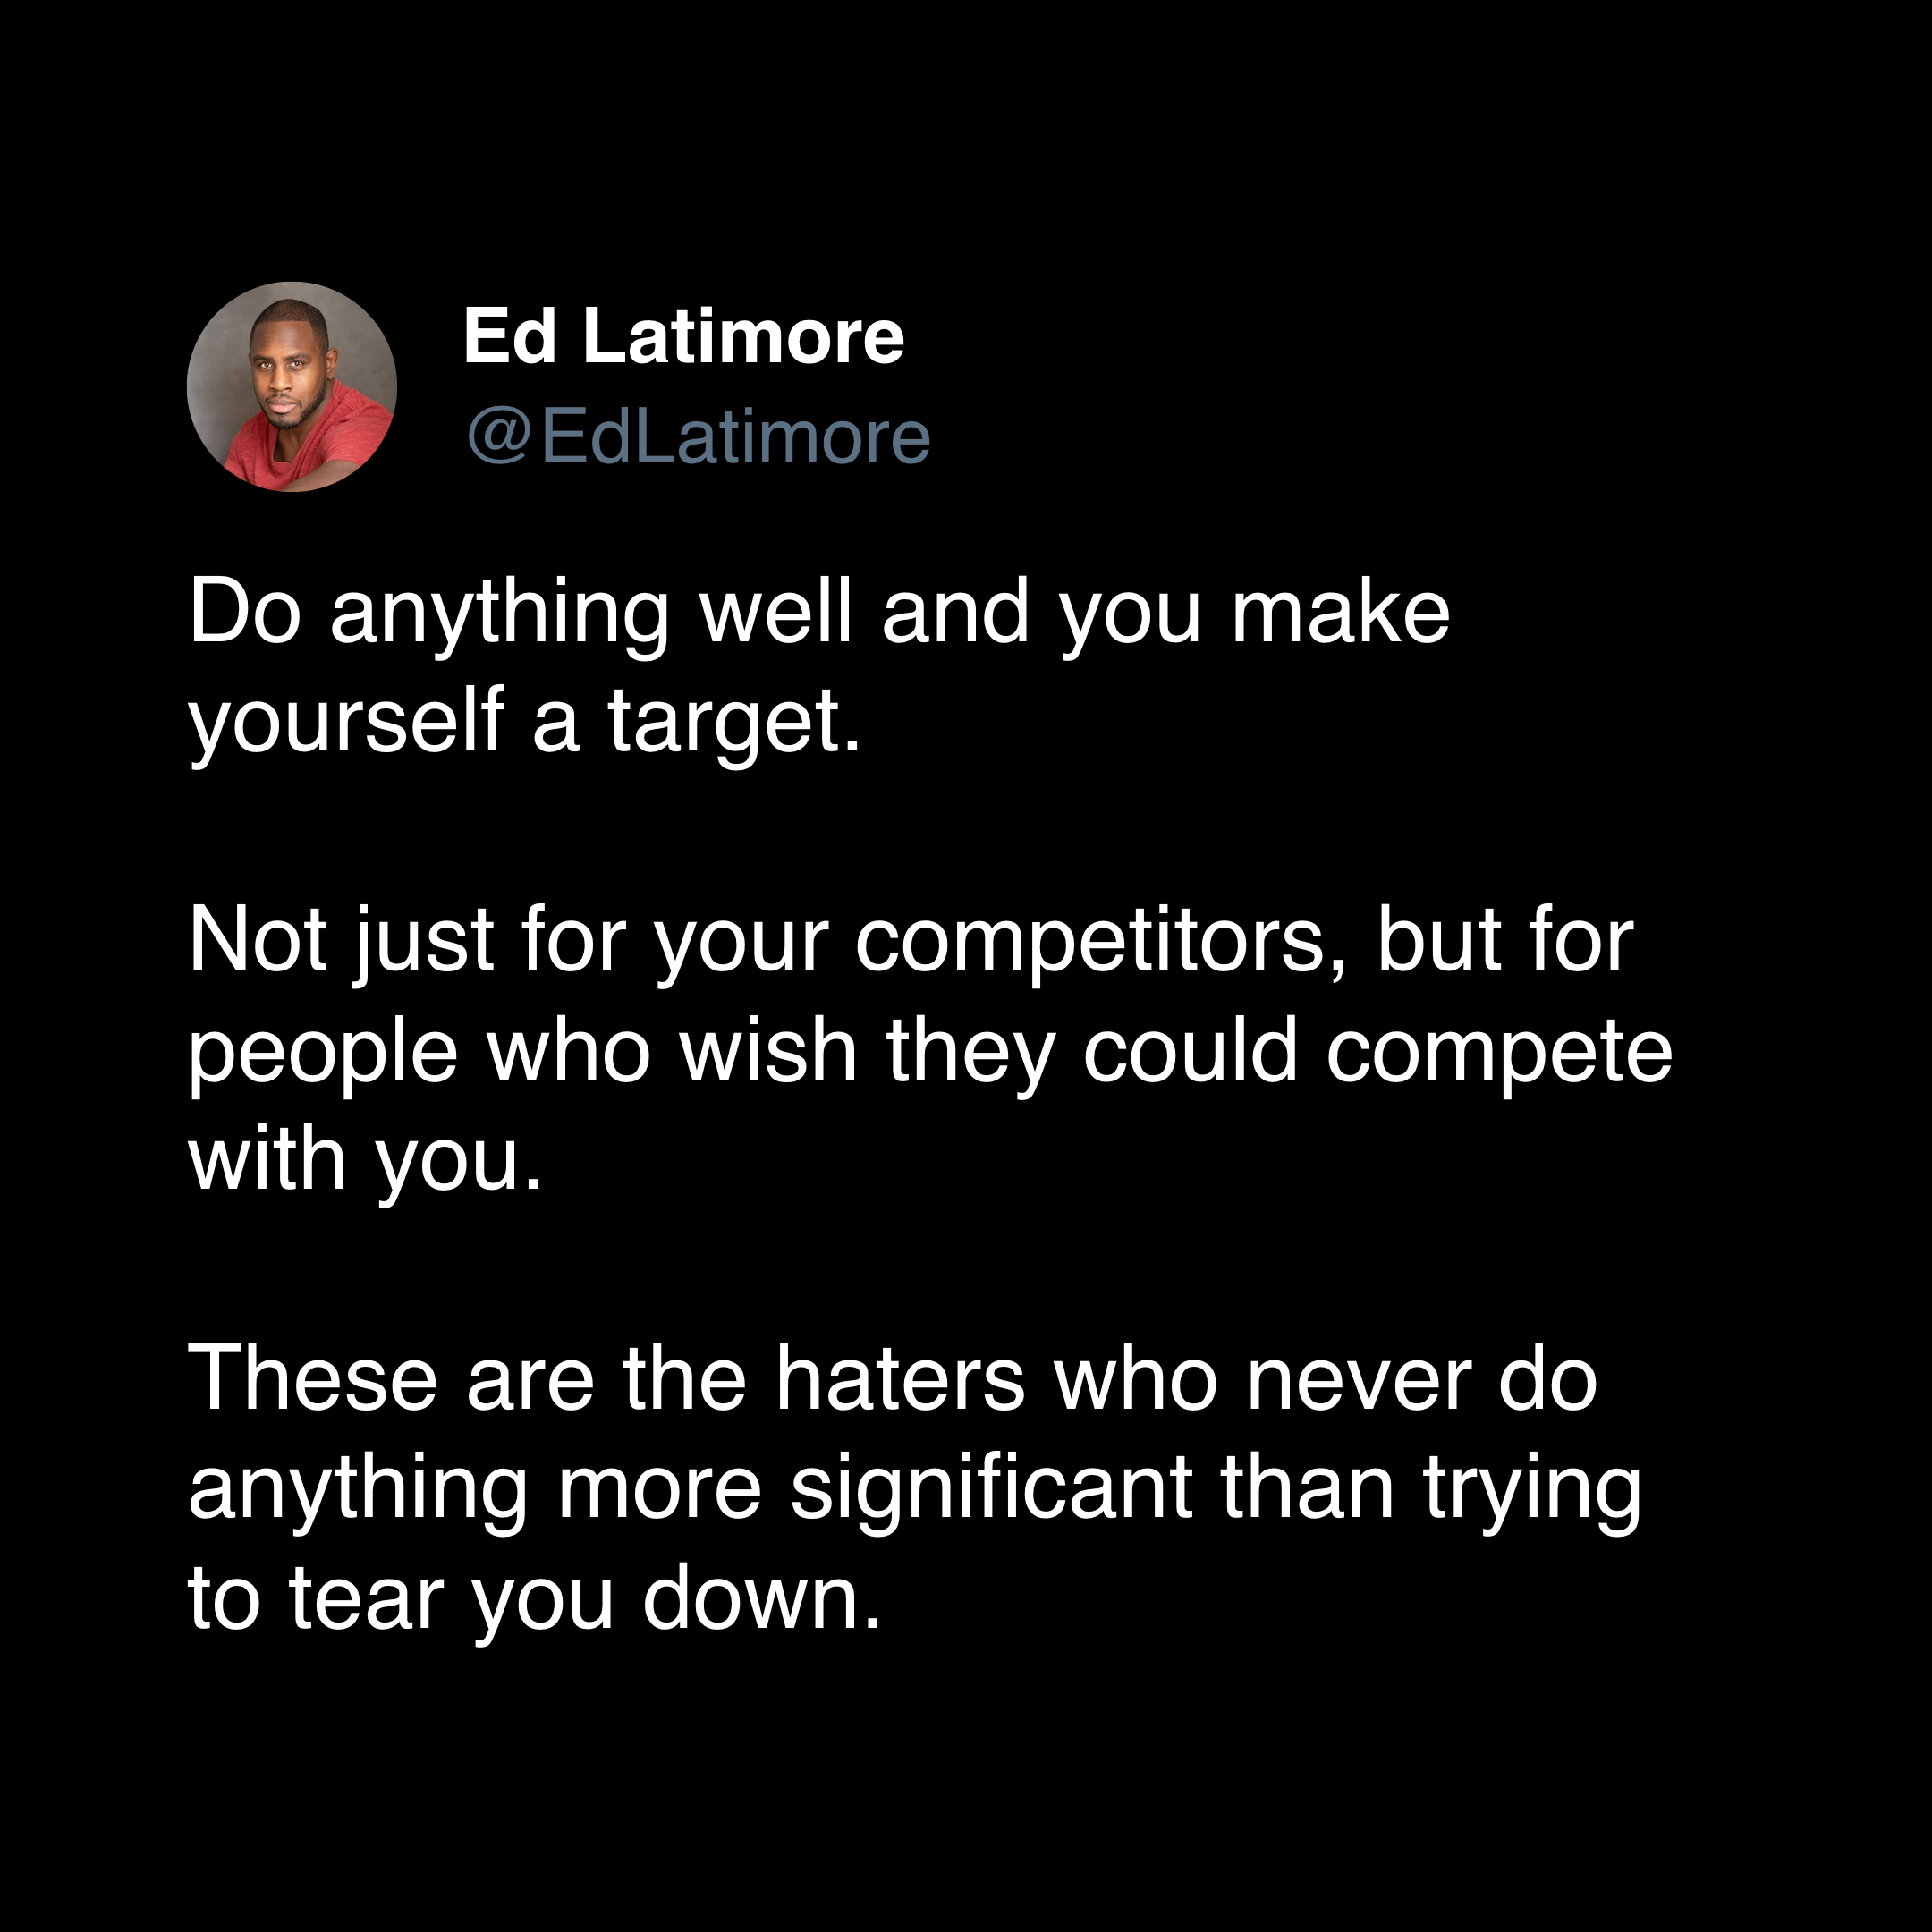 ed latimore hater quote "do anything well"